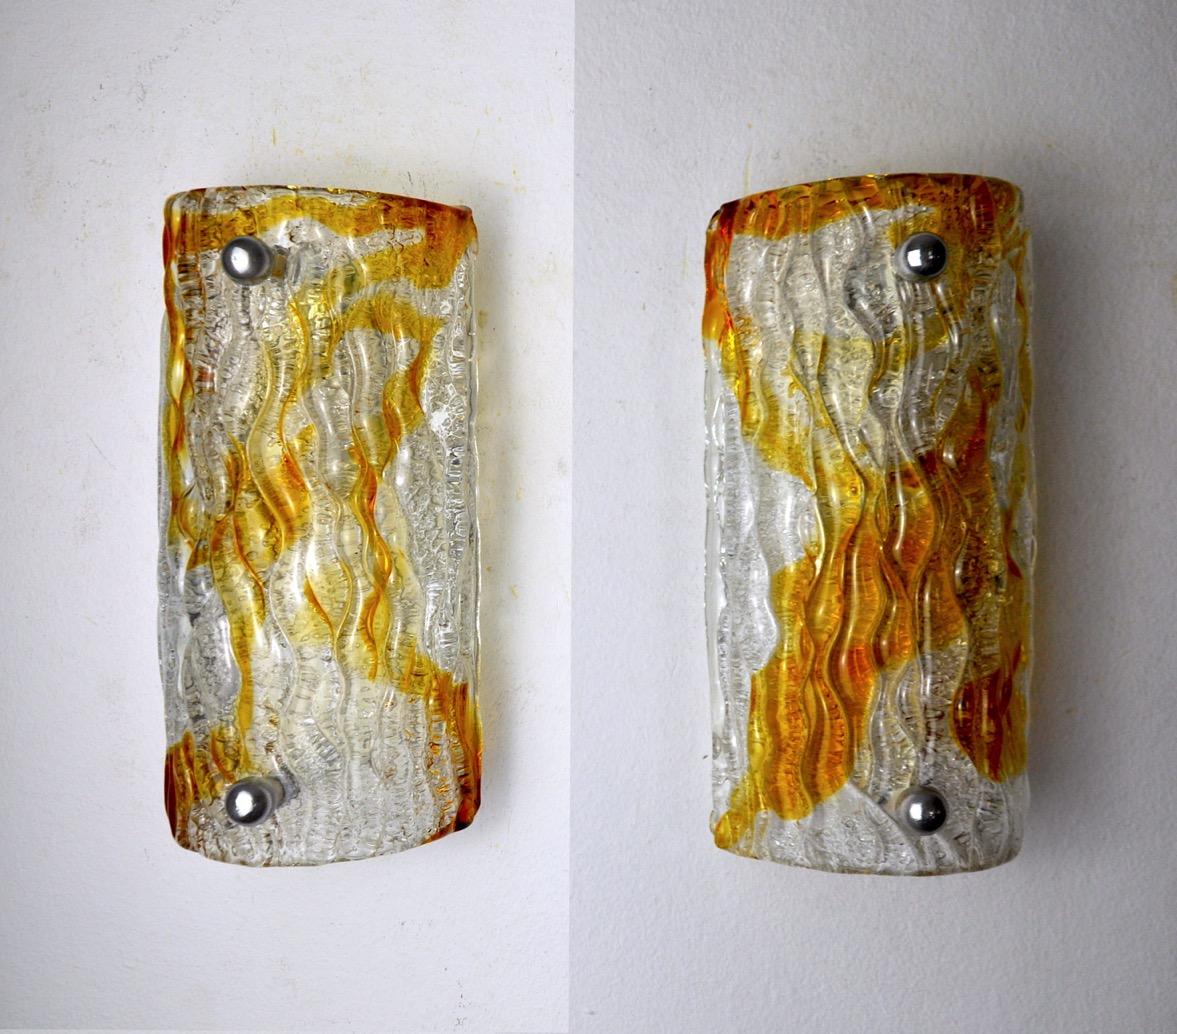 Very nice pair of mazzega murano frosted sconces designed and produced in murano, italy in the 60s. This magnificent pair of sconces is composed of an orange frosted murano glass crystal supported on a chromed metal structure. Rare design object